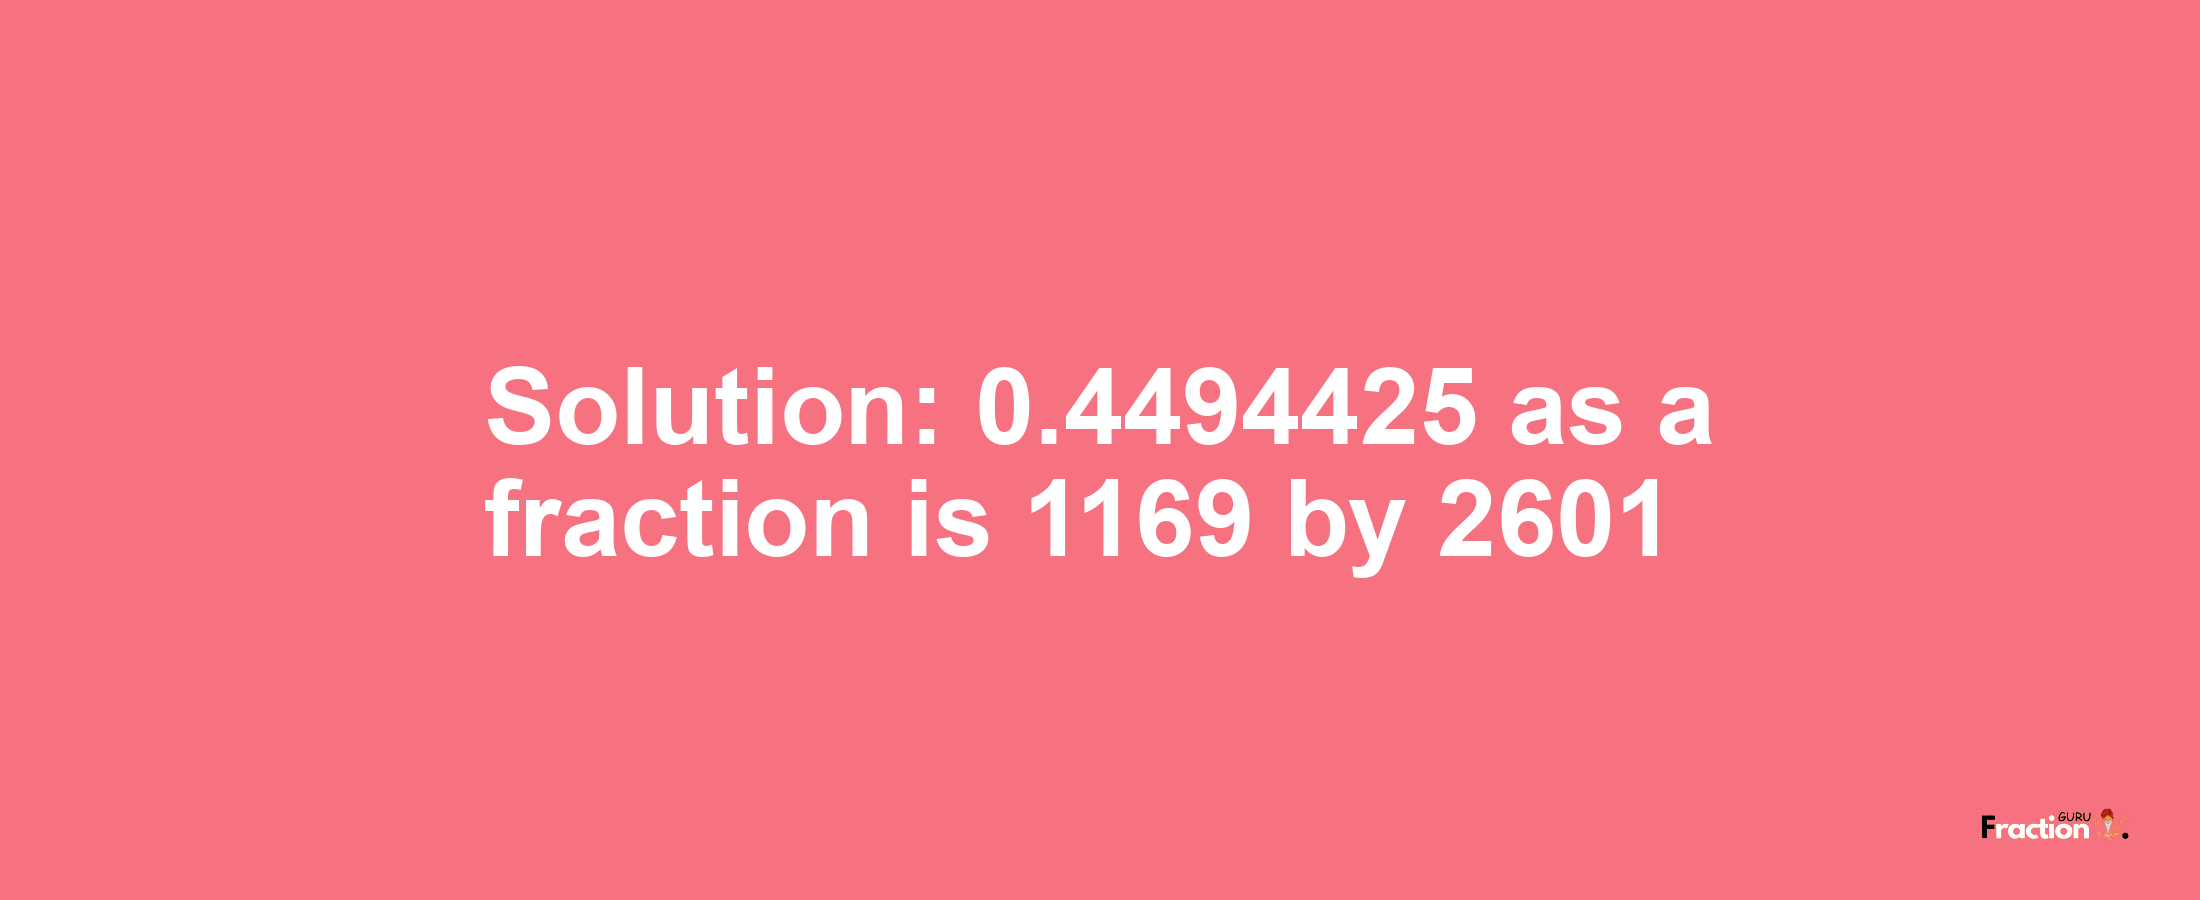 Solution:0.4494425 as a fraction is 1169/2601